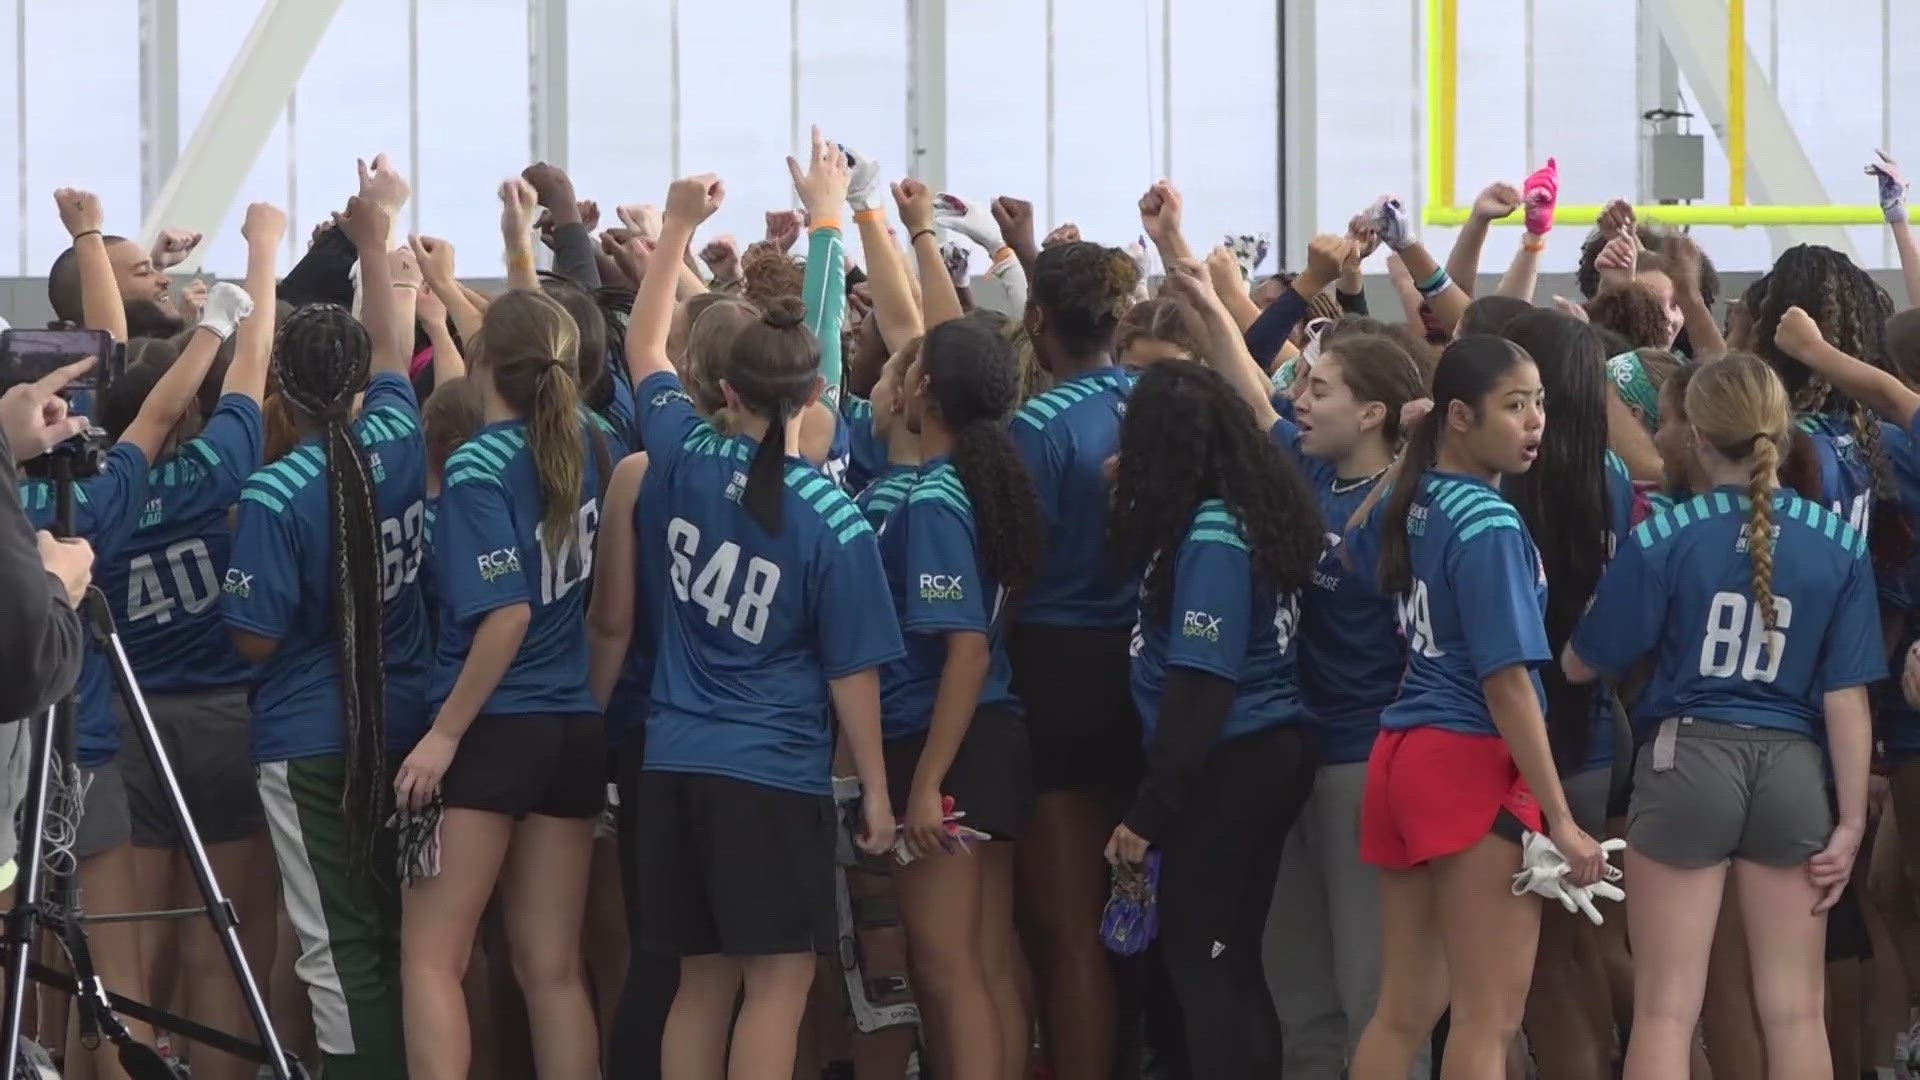 Jaguars PREP is empowering young girls in football, challenging stereotypes and fostering opportunities for females.